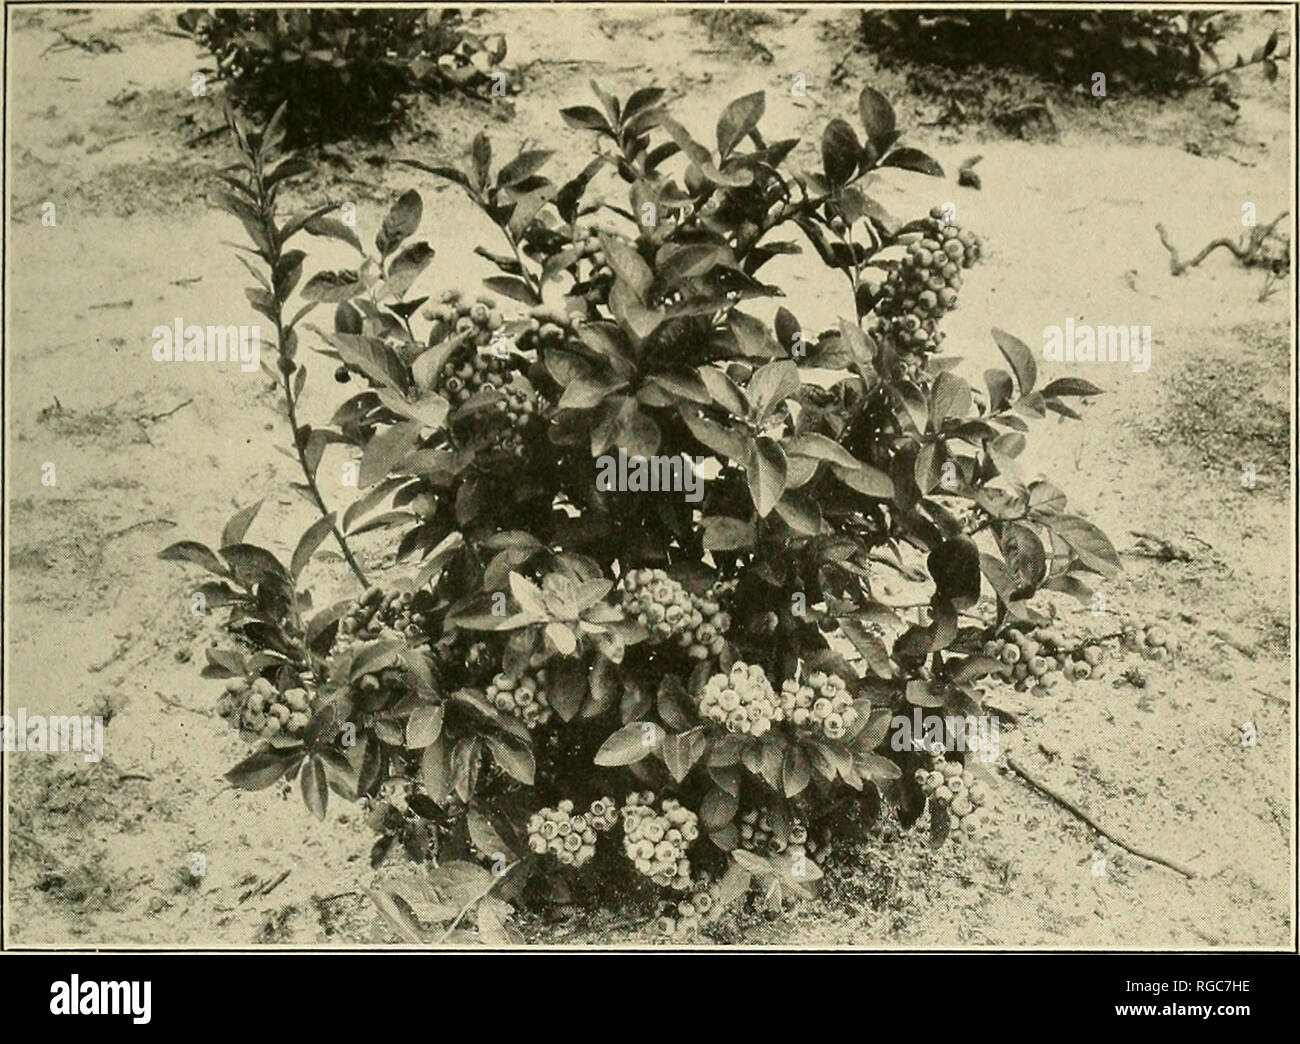 . Bulletin of the U.S. Department of Agriculture. Agriculture; Agriculture. Bui. 334, U. S. Dept of Agriculture. Plate XV.. Fiq. 1 .—Three-Year-Old Blueberry Plant in Commercial Bearing. This plant is a hybrid between two selected wild stocks, from Greenfield, N. H., and Brown Mills, N. J. They were hybridized in the greenhouses at Washington in the summer of 1912, and the hybrid seeds were sown September 9. The young plants were carried over winter in the greenhouse, and early in September, 1913, they were sent to Whitesbog, N. J., and set out in a trial field plantation. The photograph was t Stock Photo